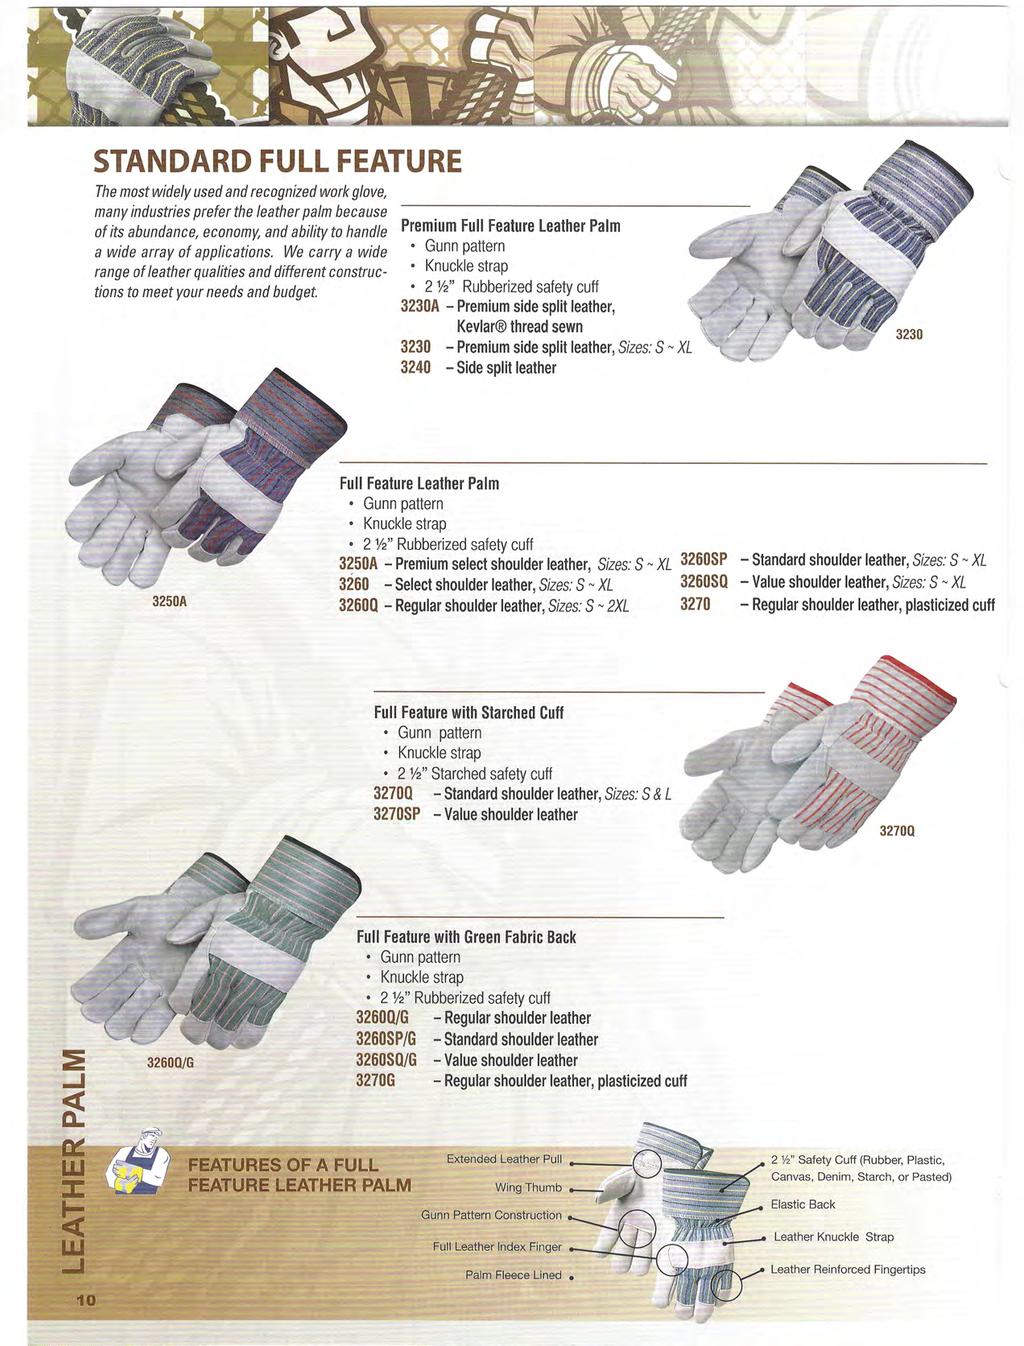 STANDARD FULL FEATURE The most widely used and recognized work glove, many industries prefer the leather palm because of its abundance, economy, and ability to handle a wide array of applications.